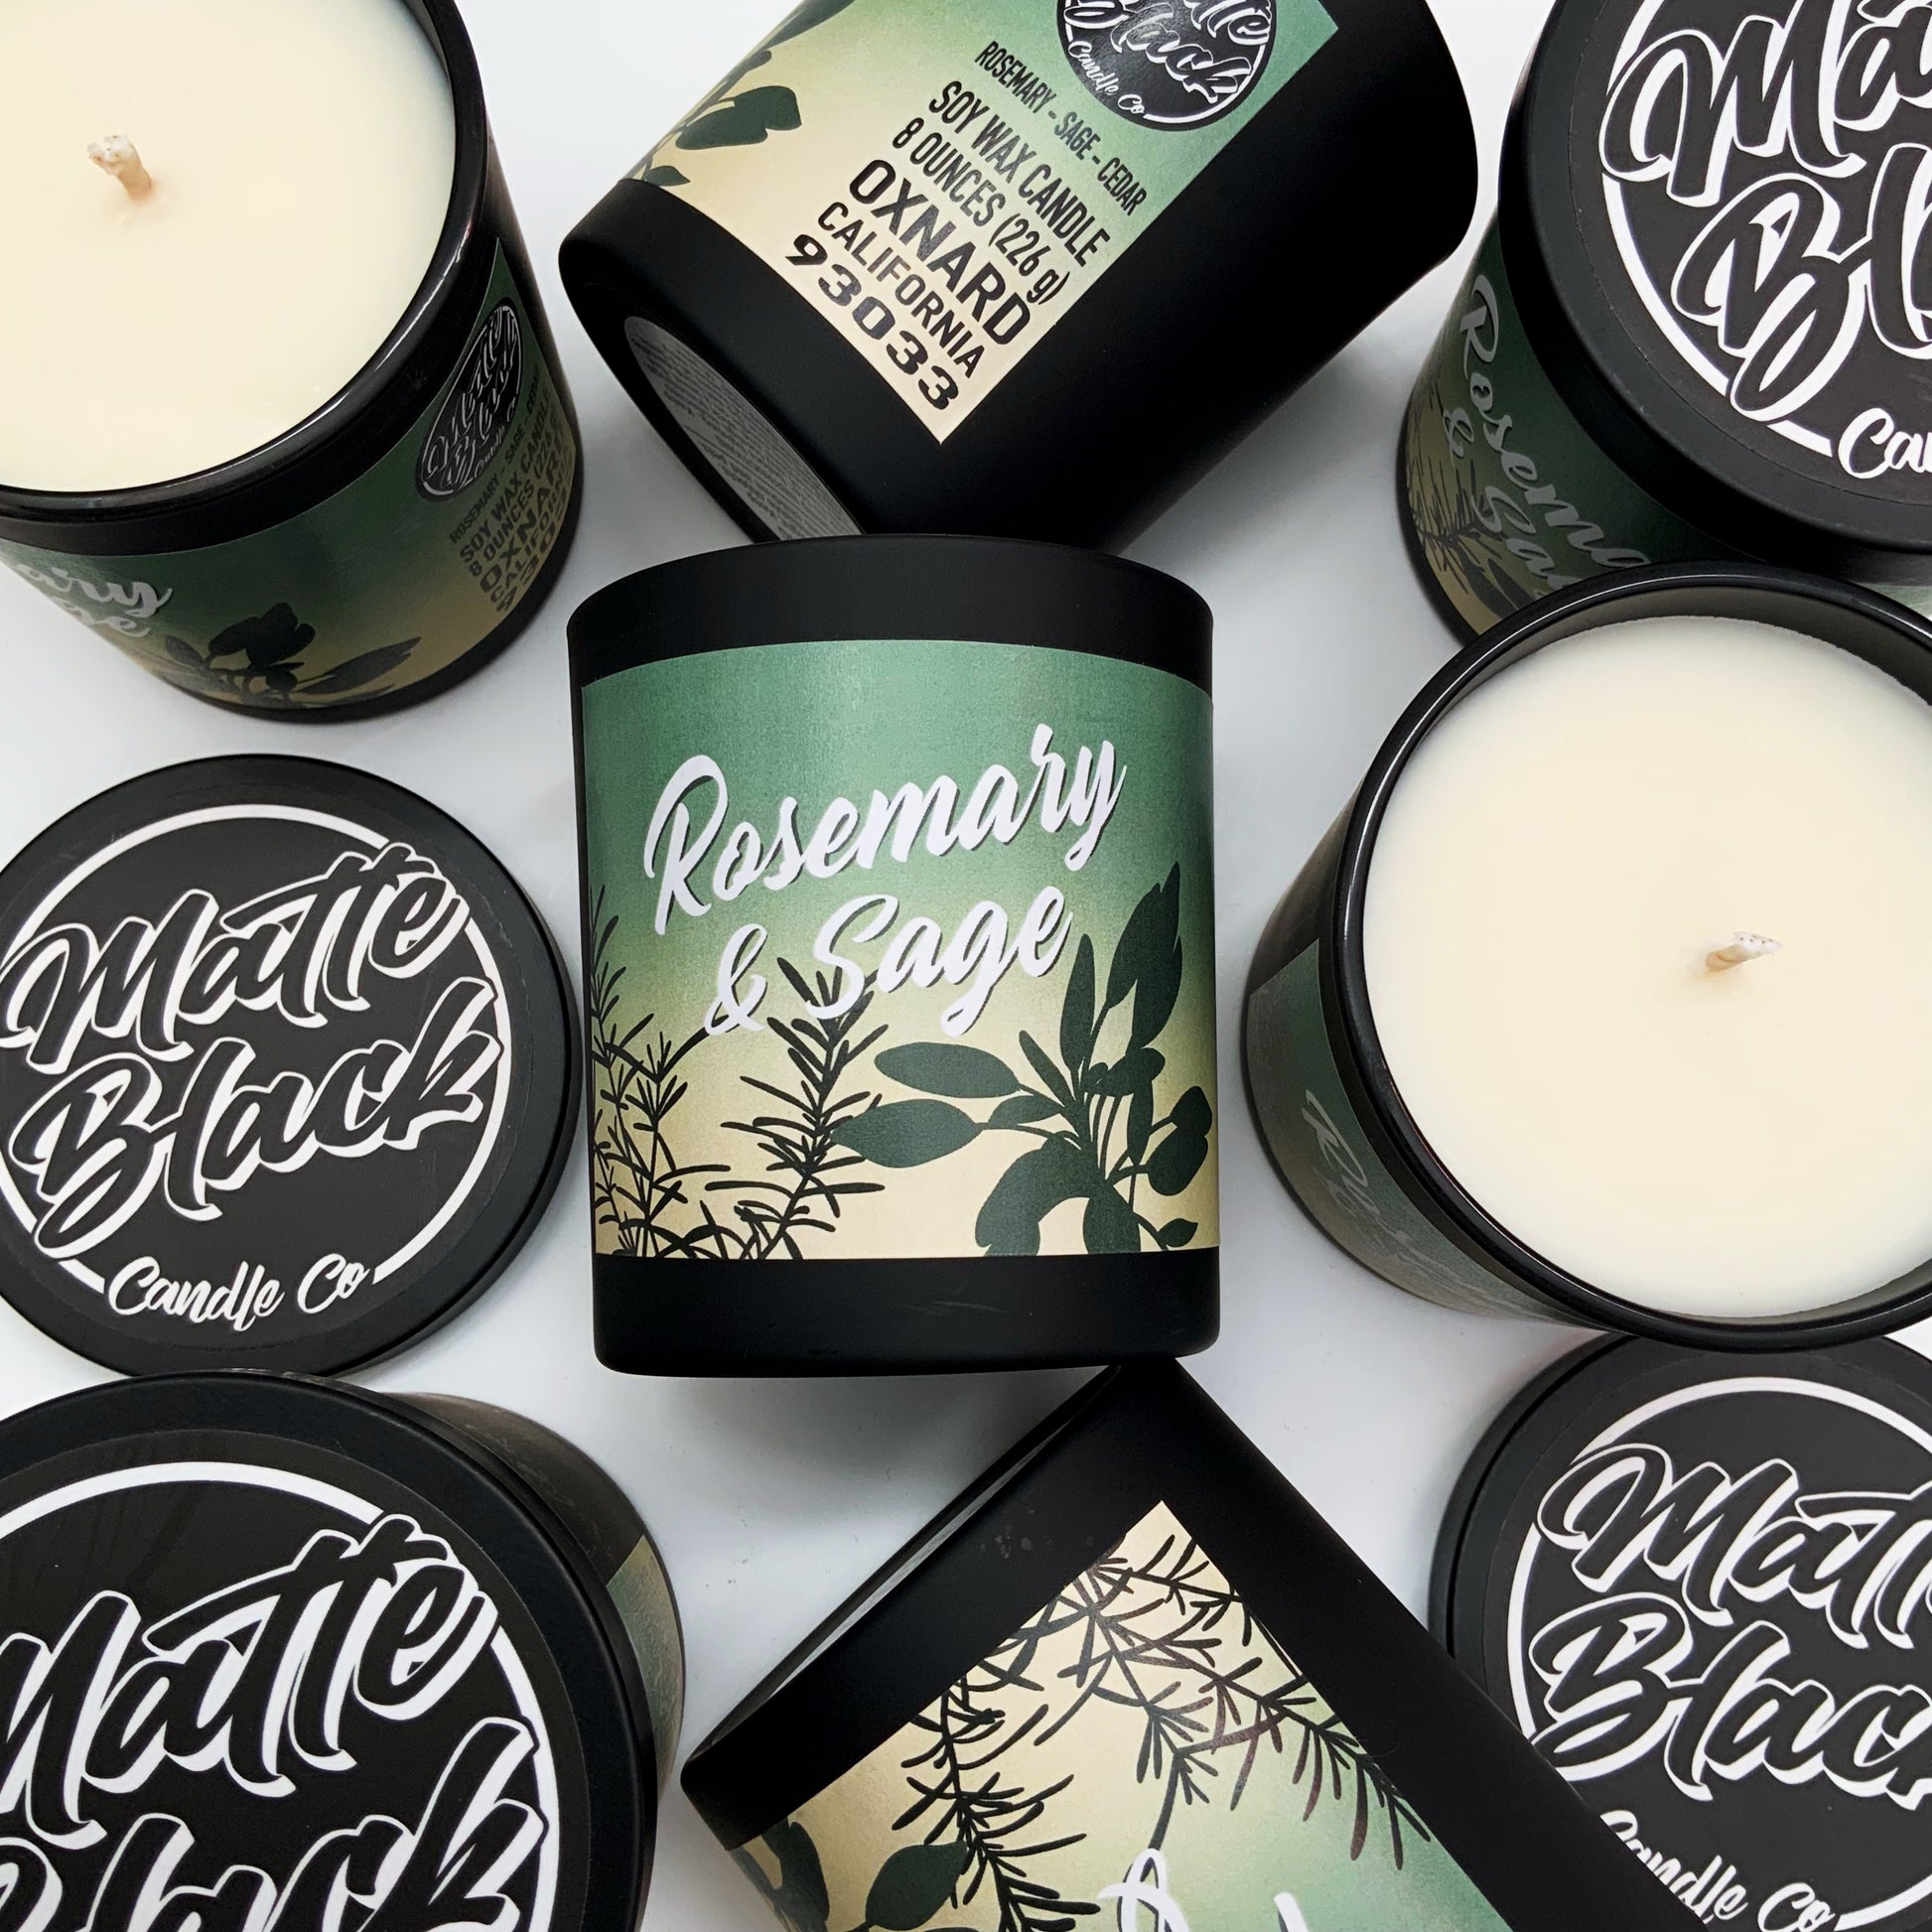 Rosemary & Sage - Matte Black Candle Co